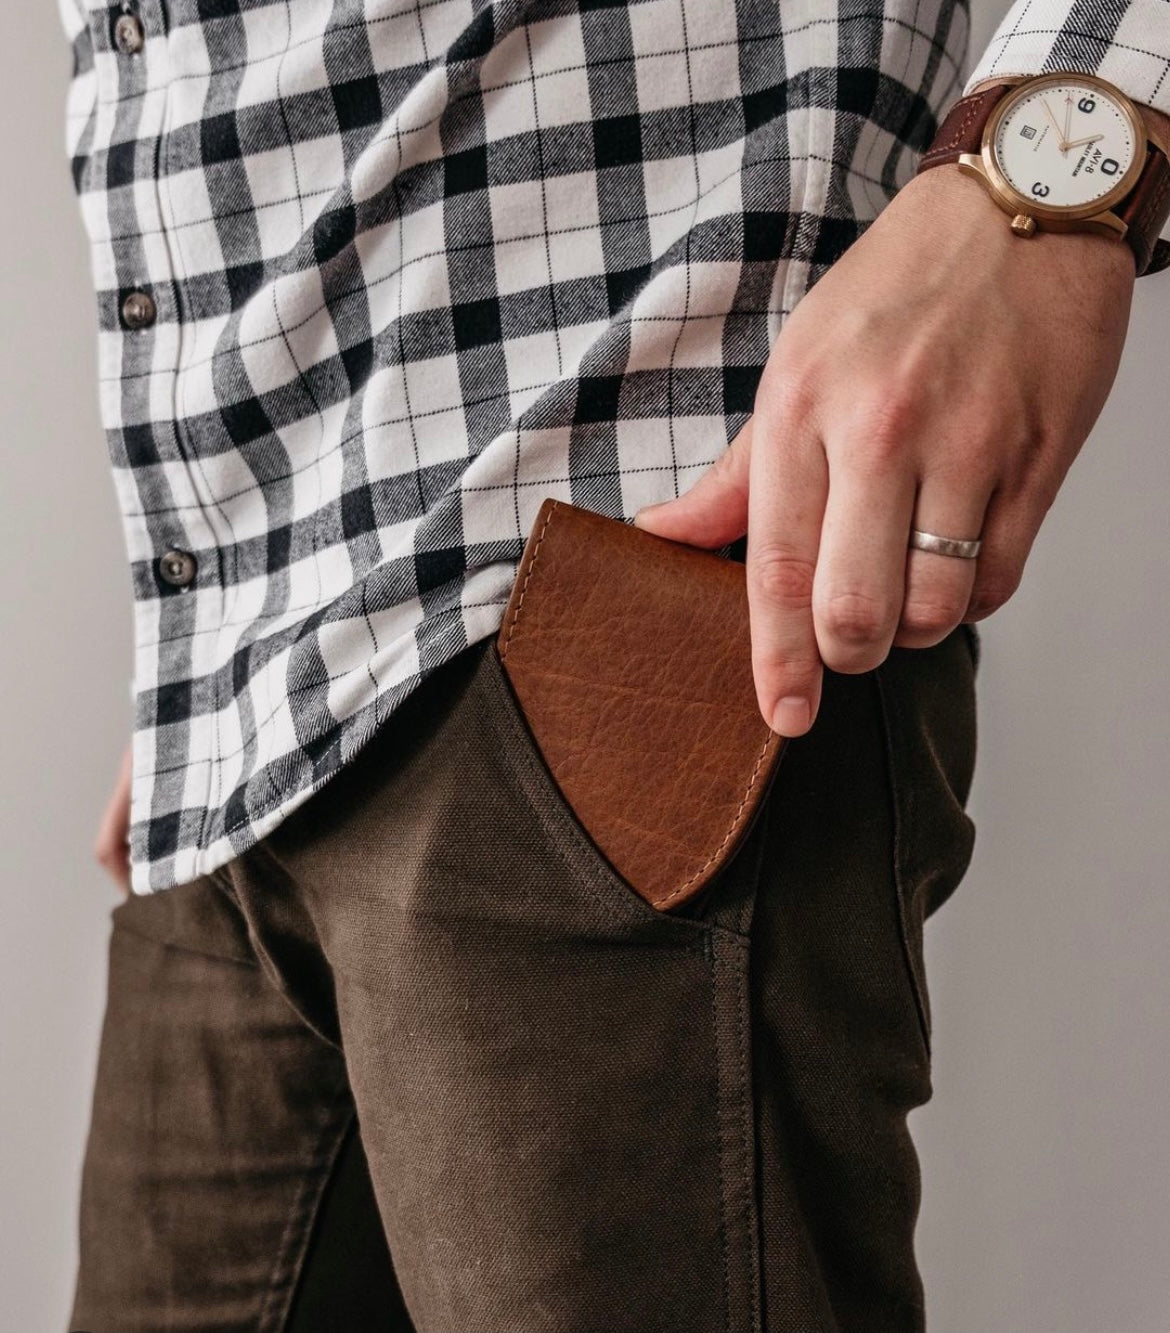 Men's Leather Wallet: 4 Types of Wallets and When to Use Them